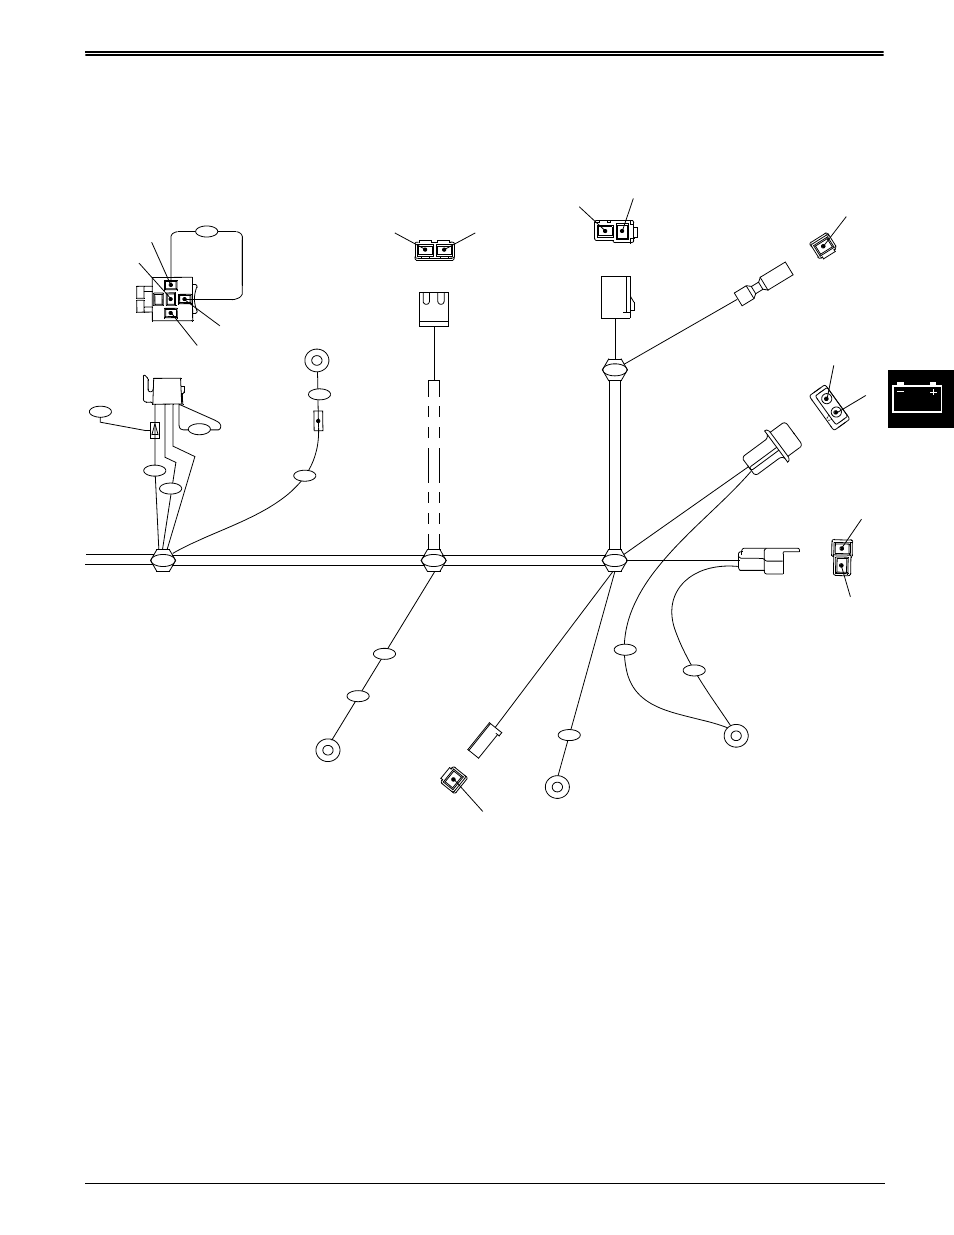 Wiring Harness Diagrams Electrical